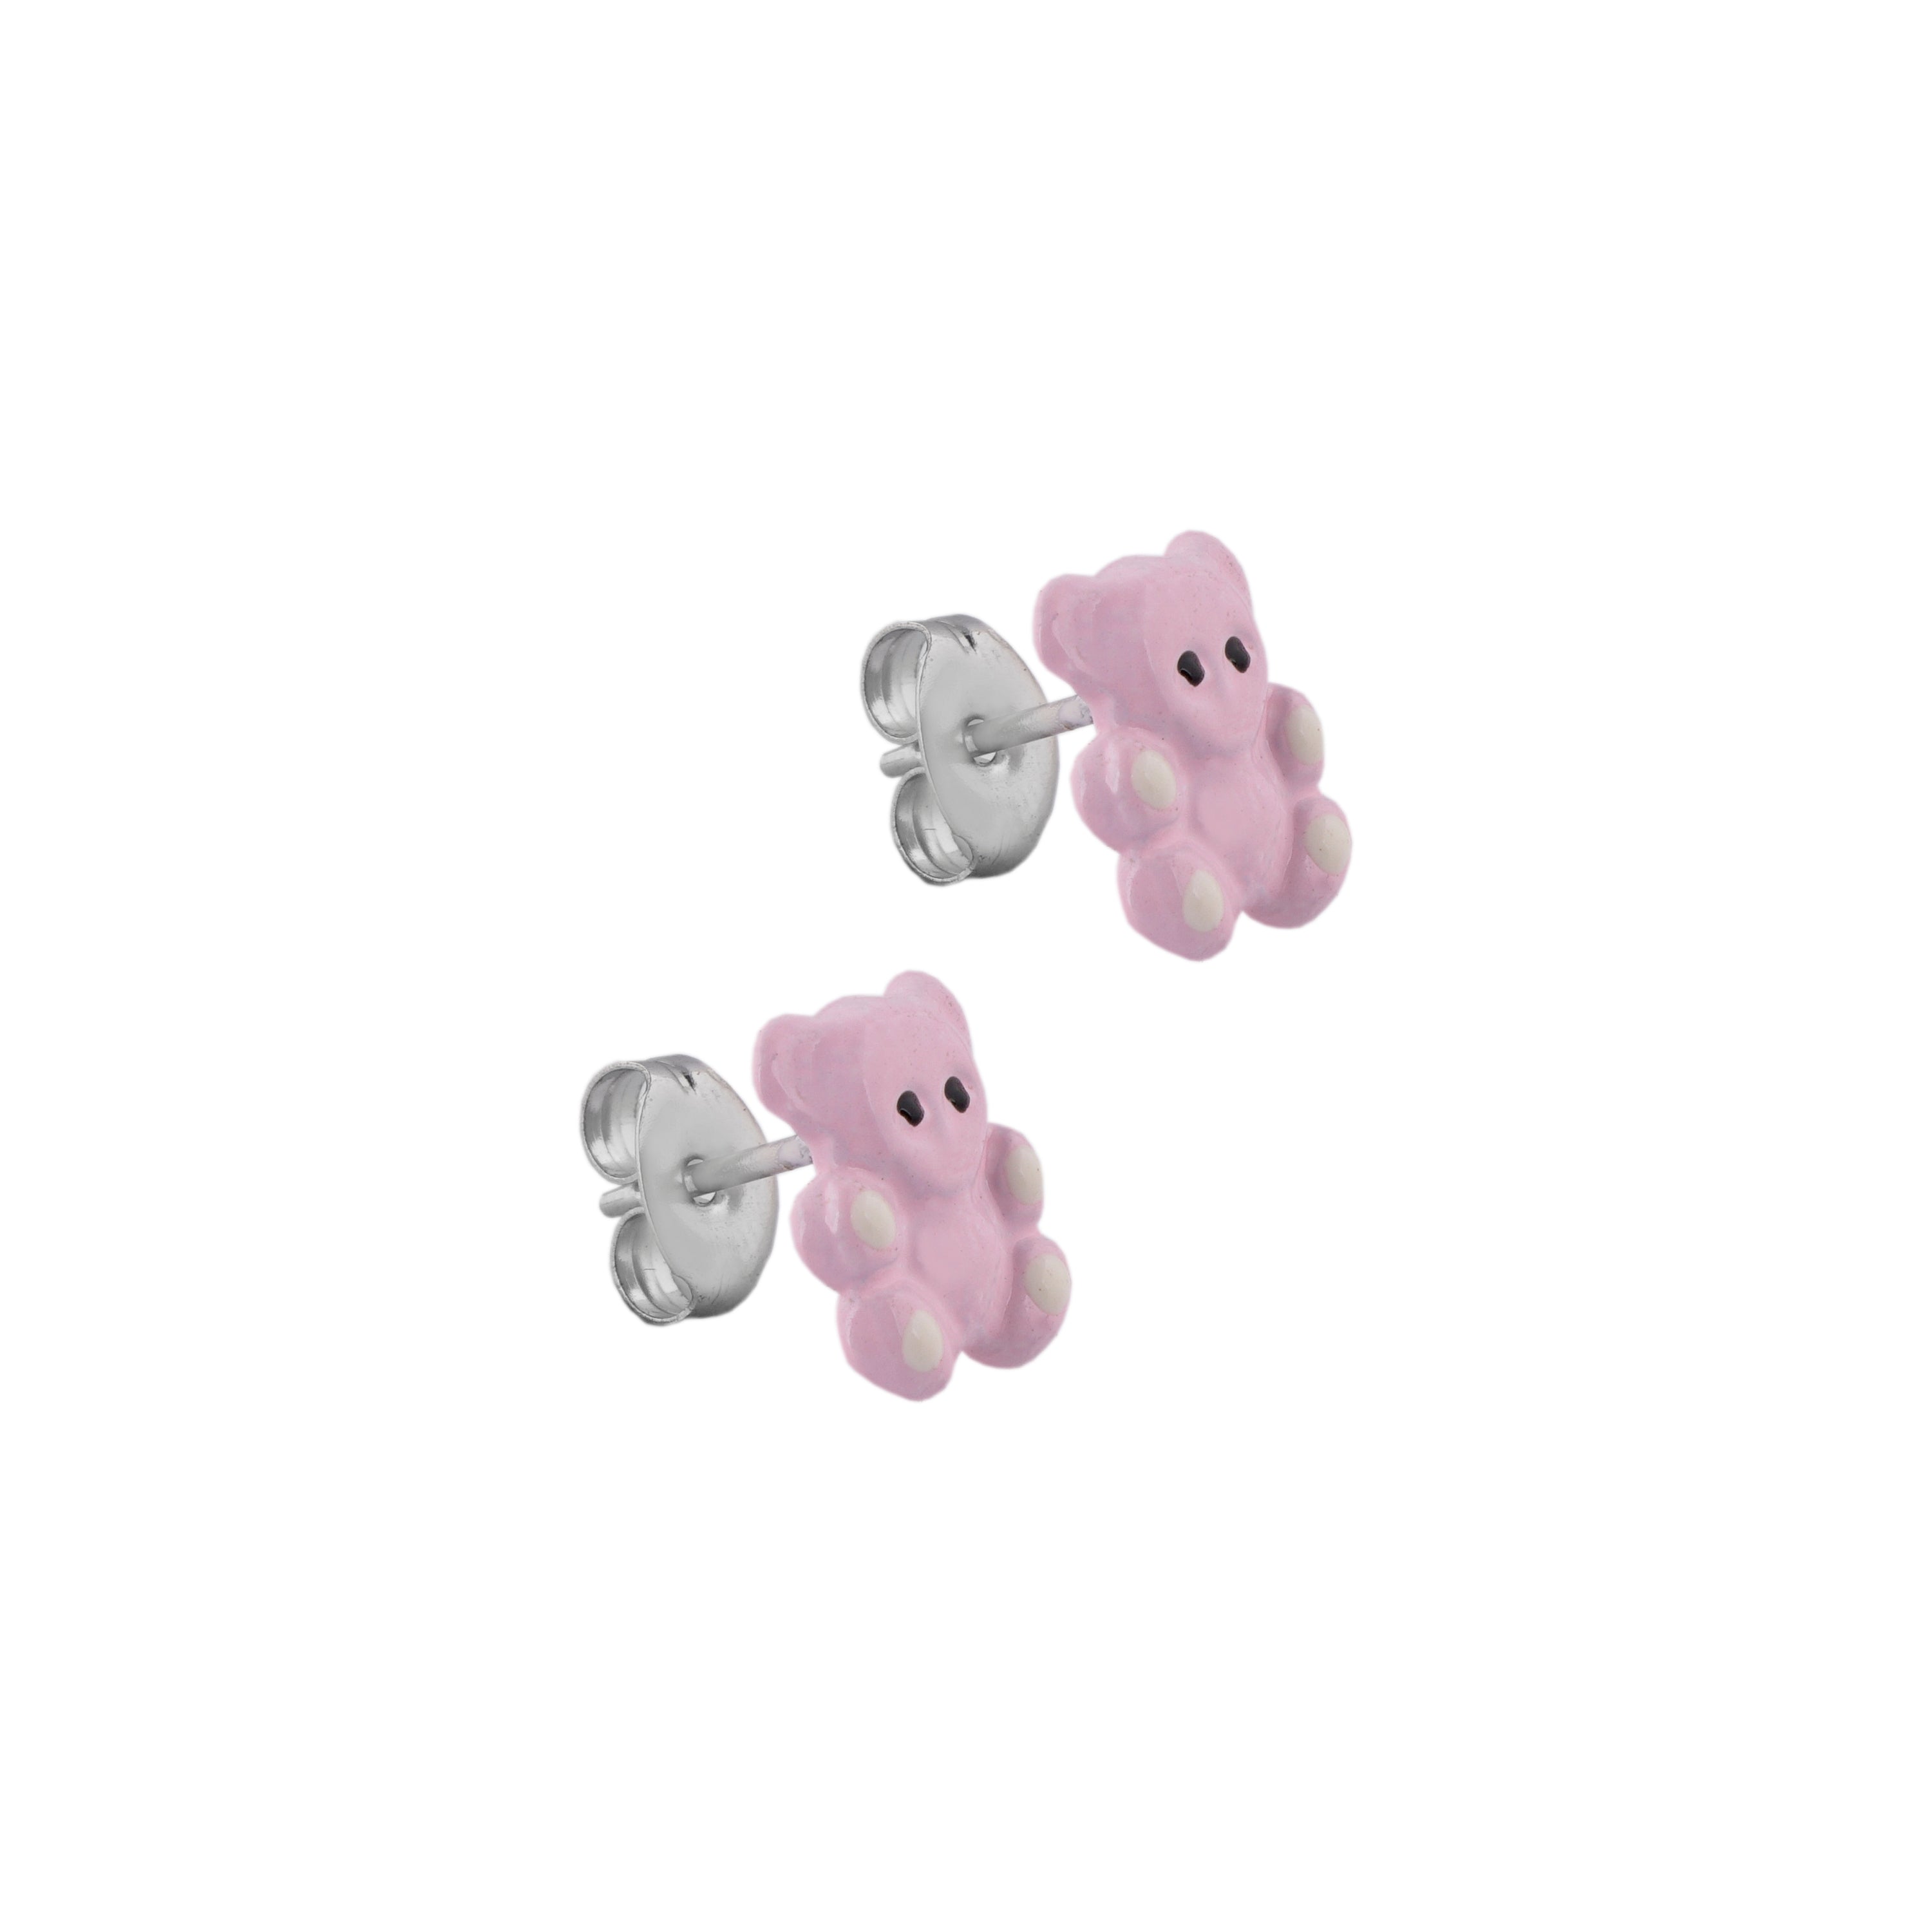 Pink Teddy Bear Allergy free Stainless Steel Ear Studs For Kids | Ideal for everyday wear